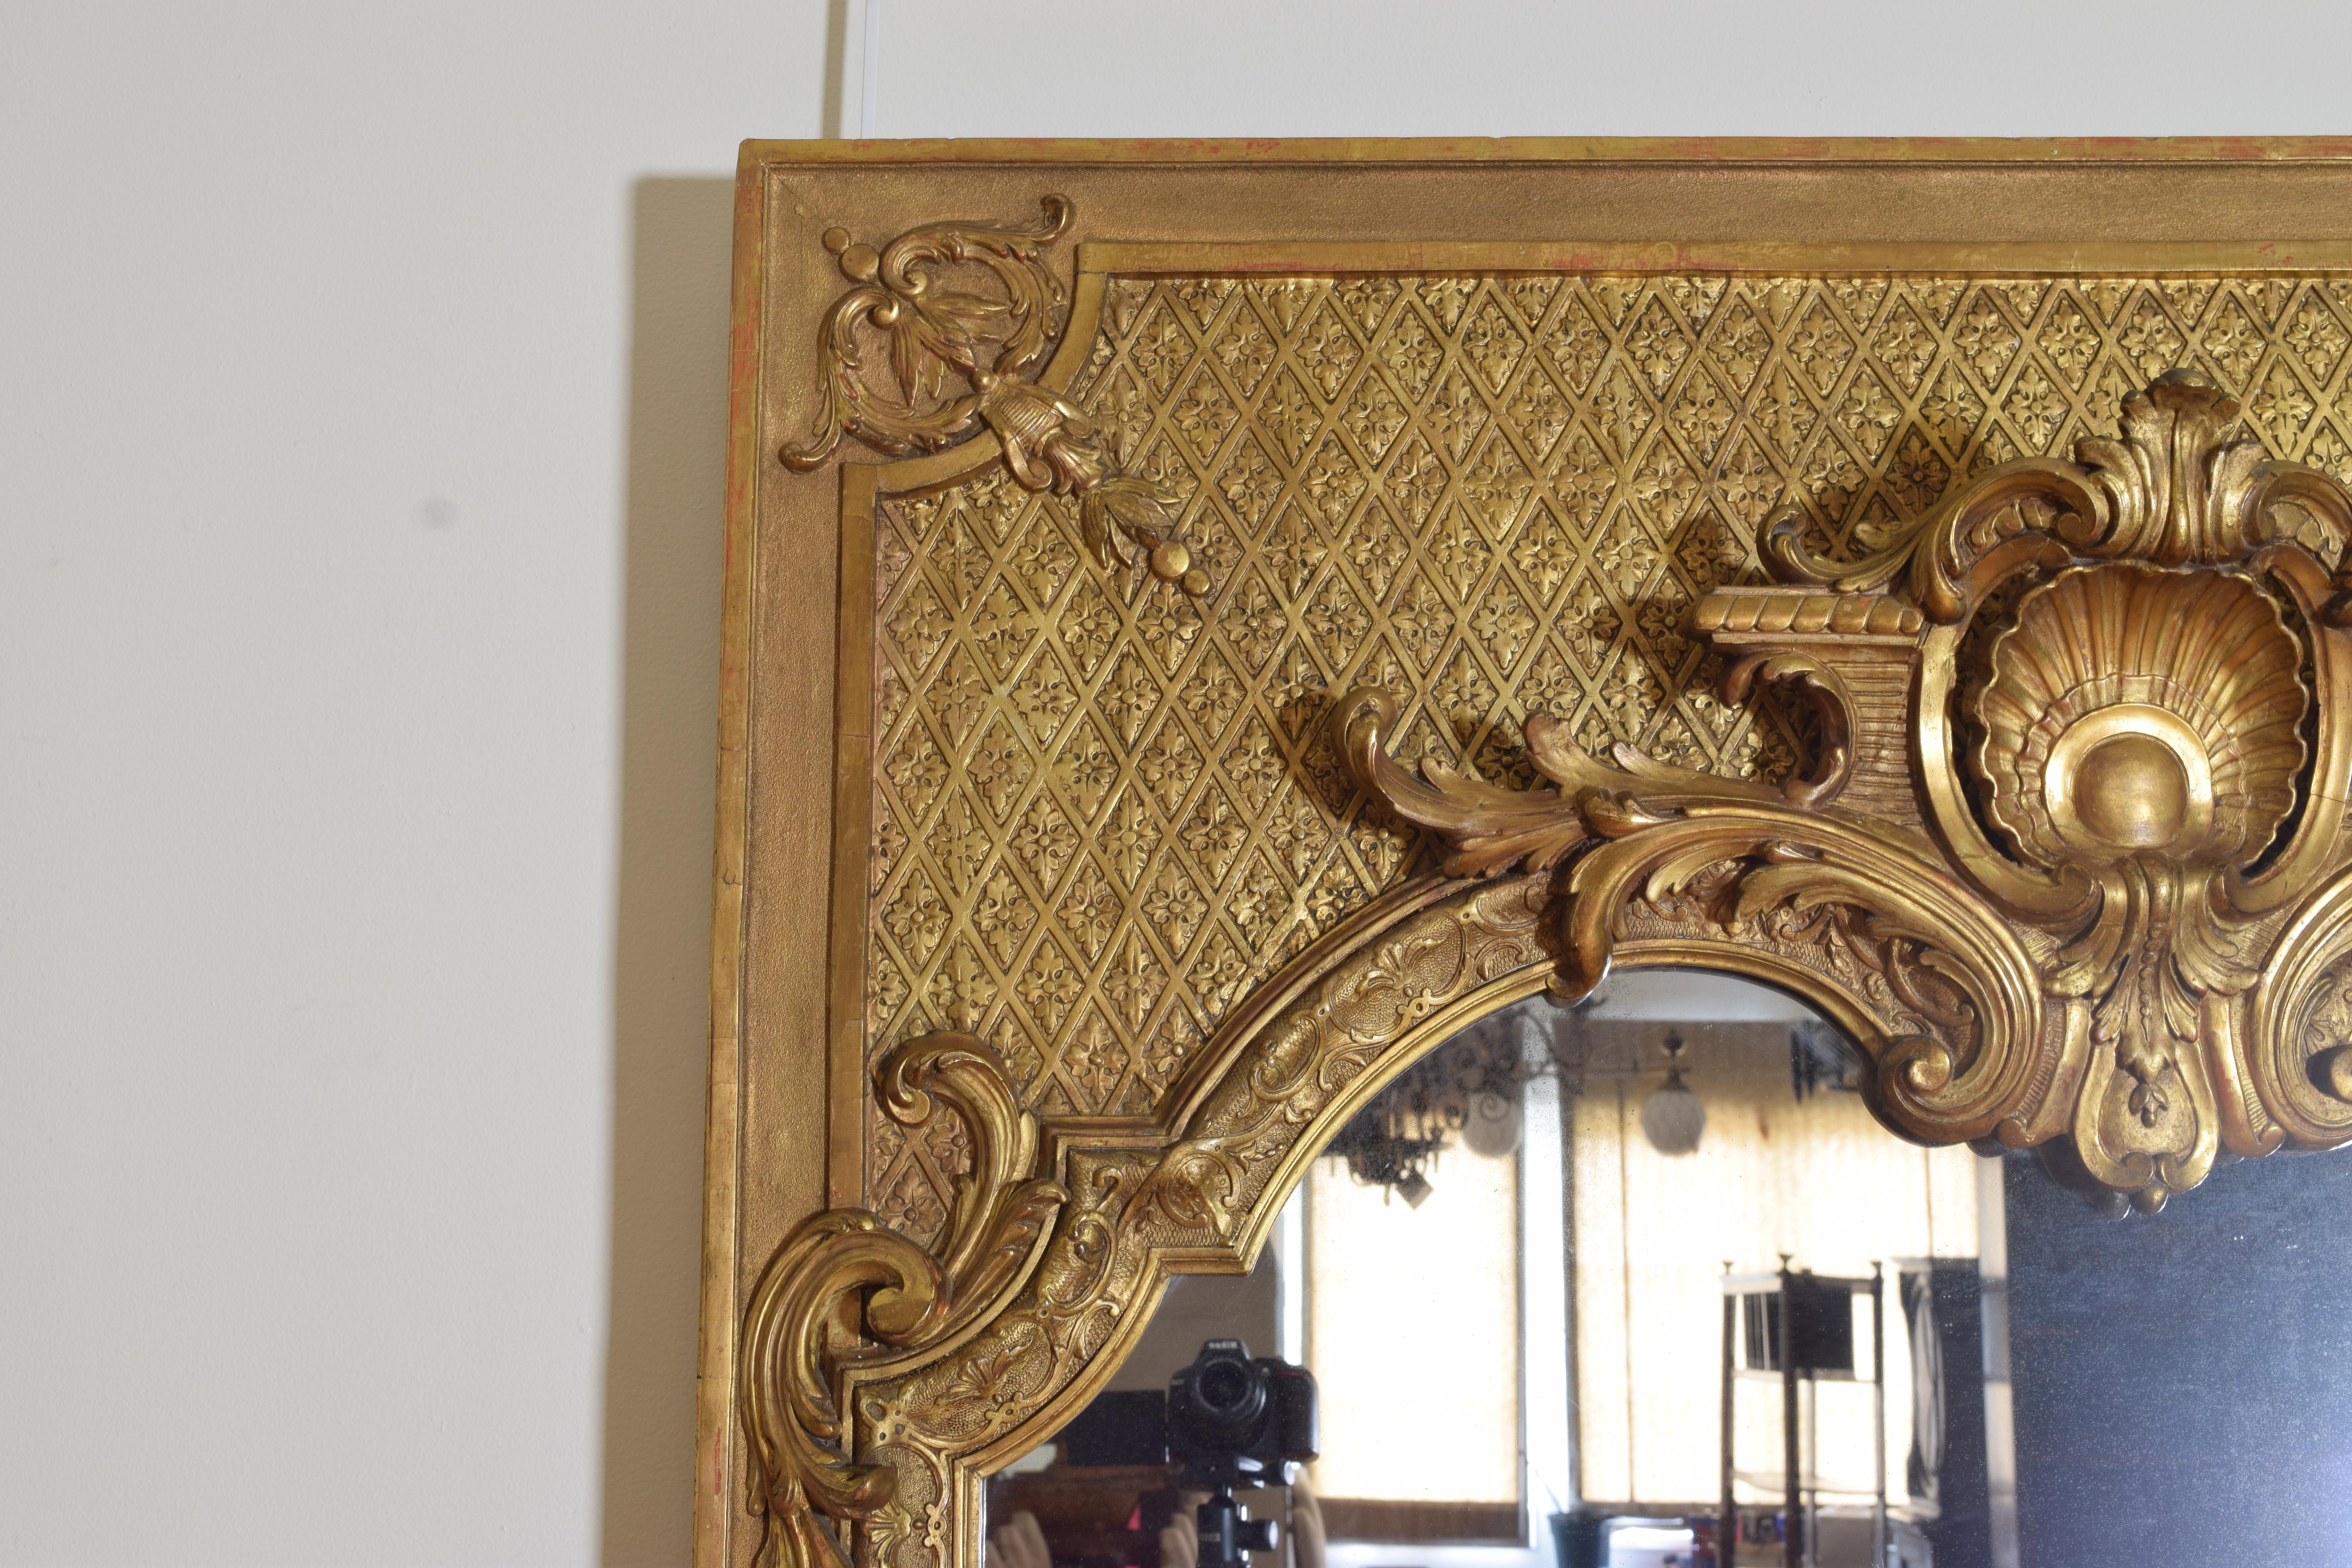 Late 19th Century Large French Regence Style Carved Giltwood and Gilt-Gesso Mirror, 3rdq 19th cen.